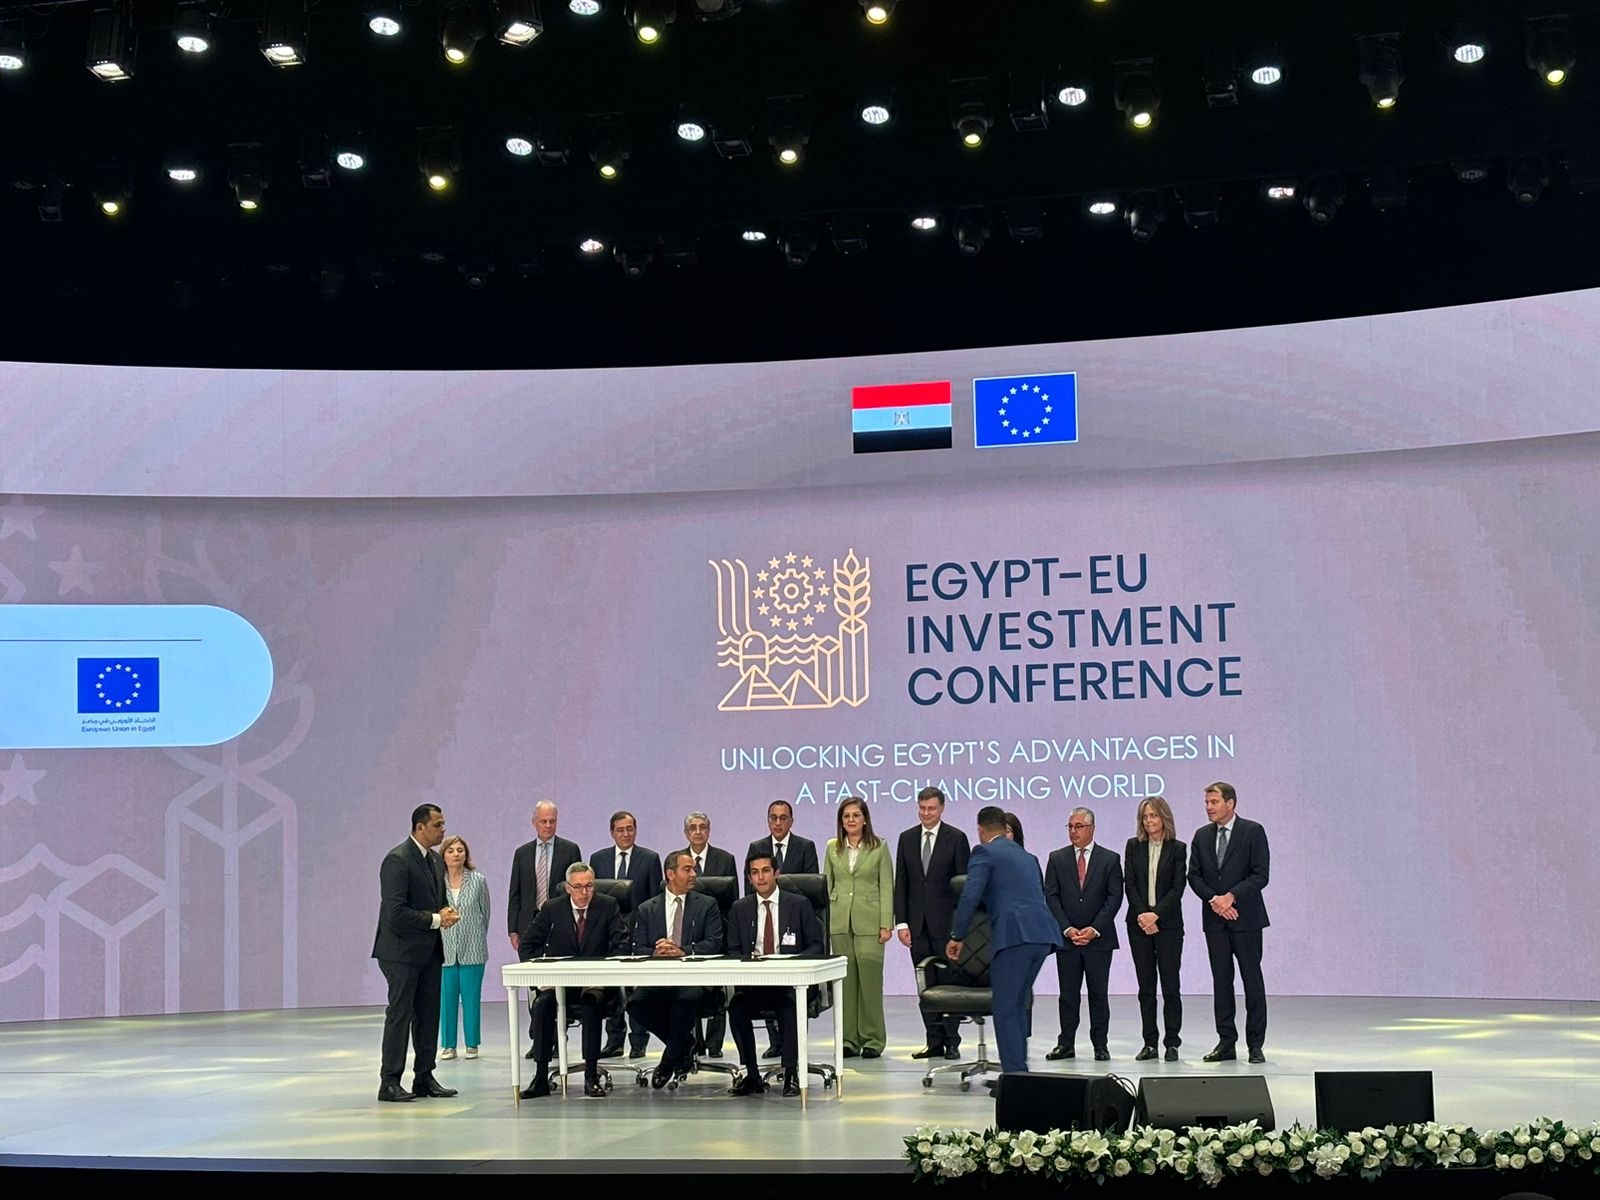 Scatec Announces Major Progress in Egypt Green Hydrogen Project with New Offtake Agreement